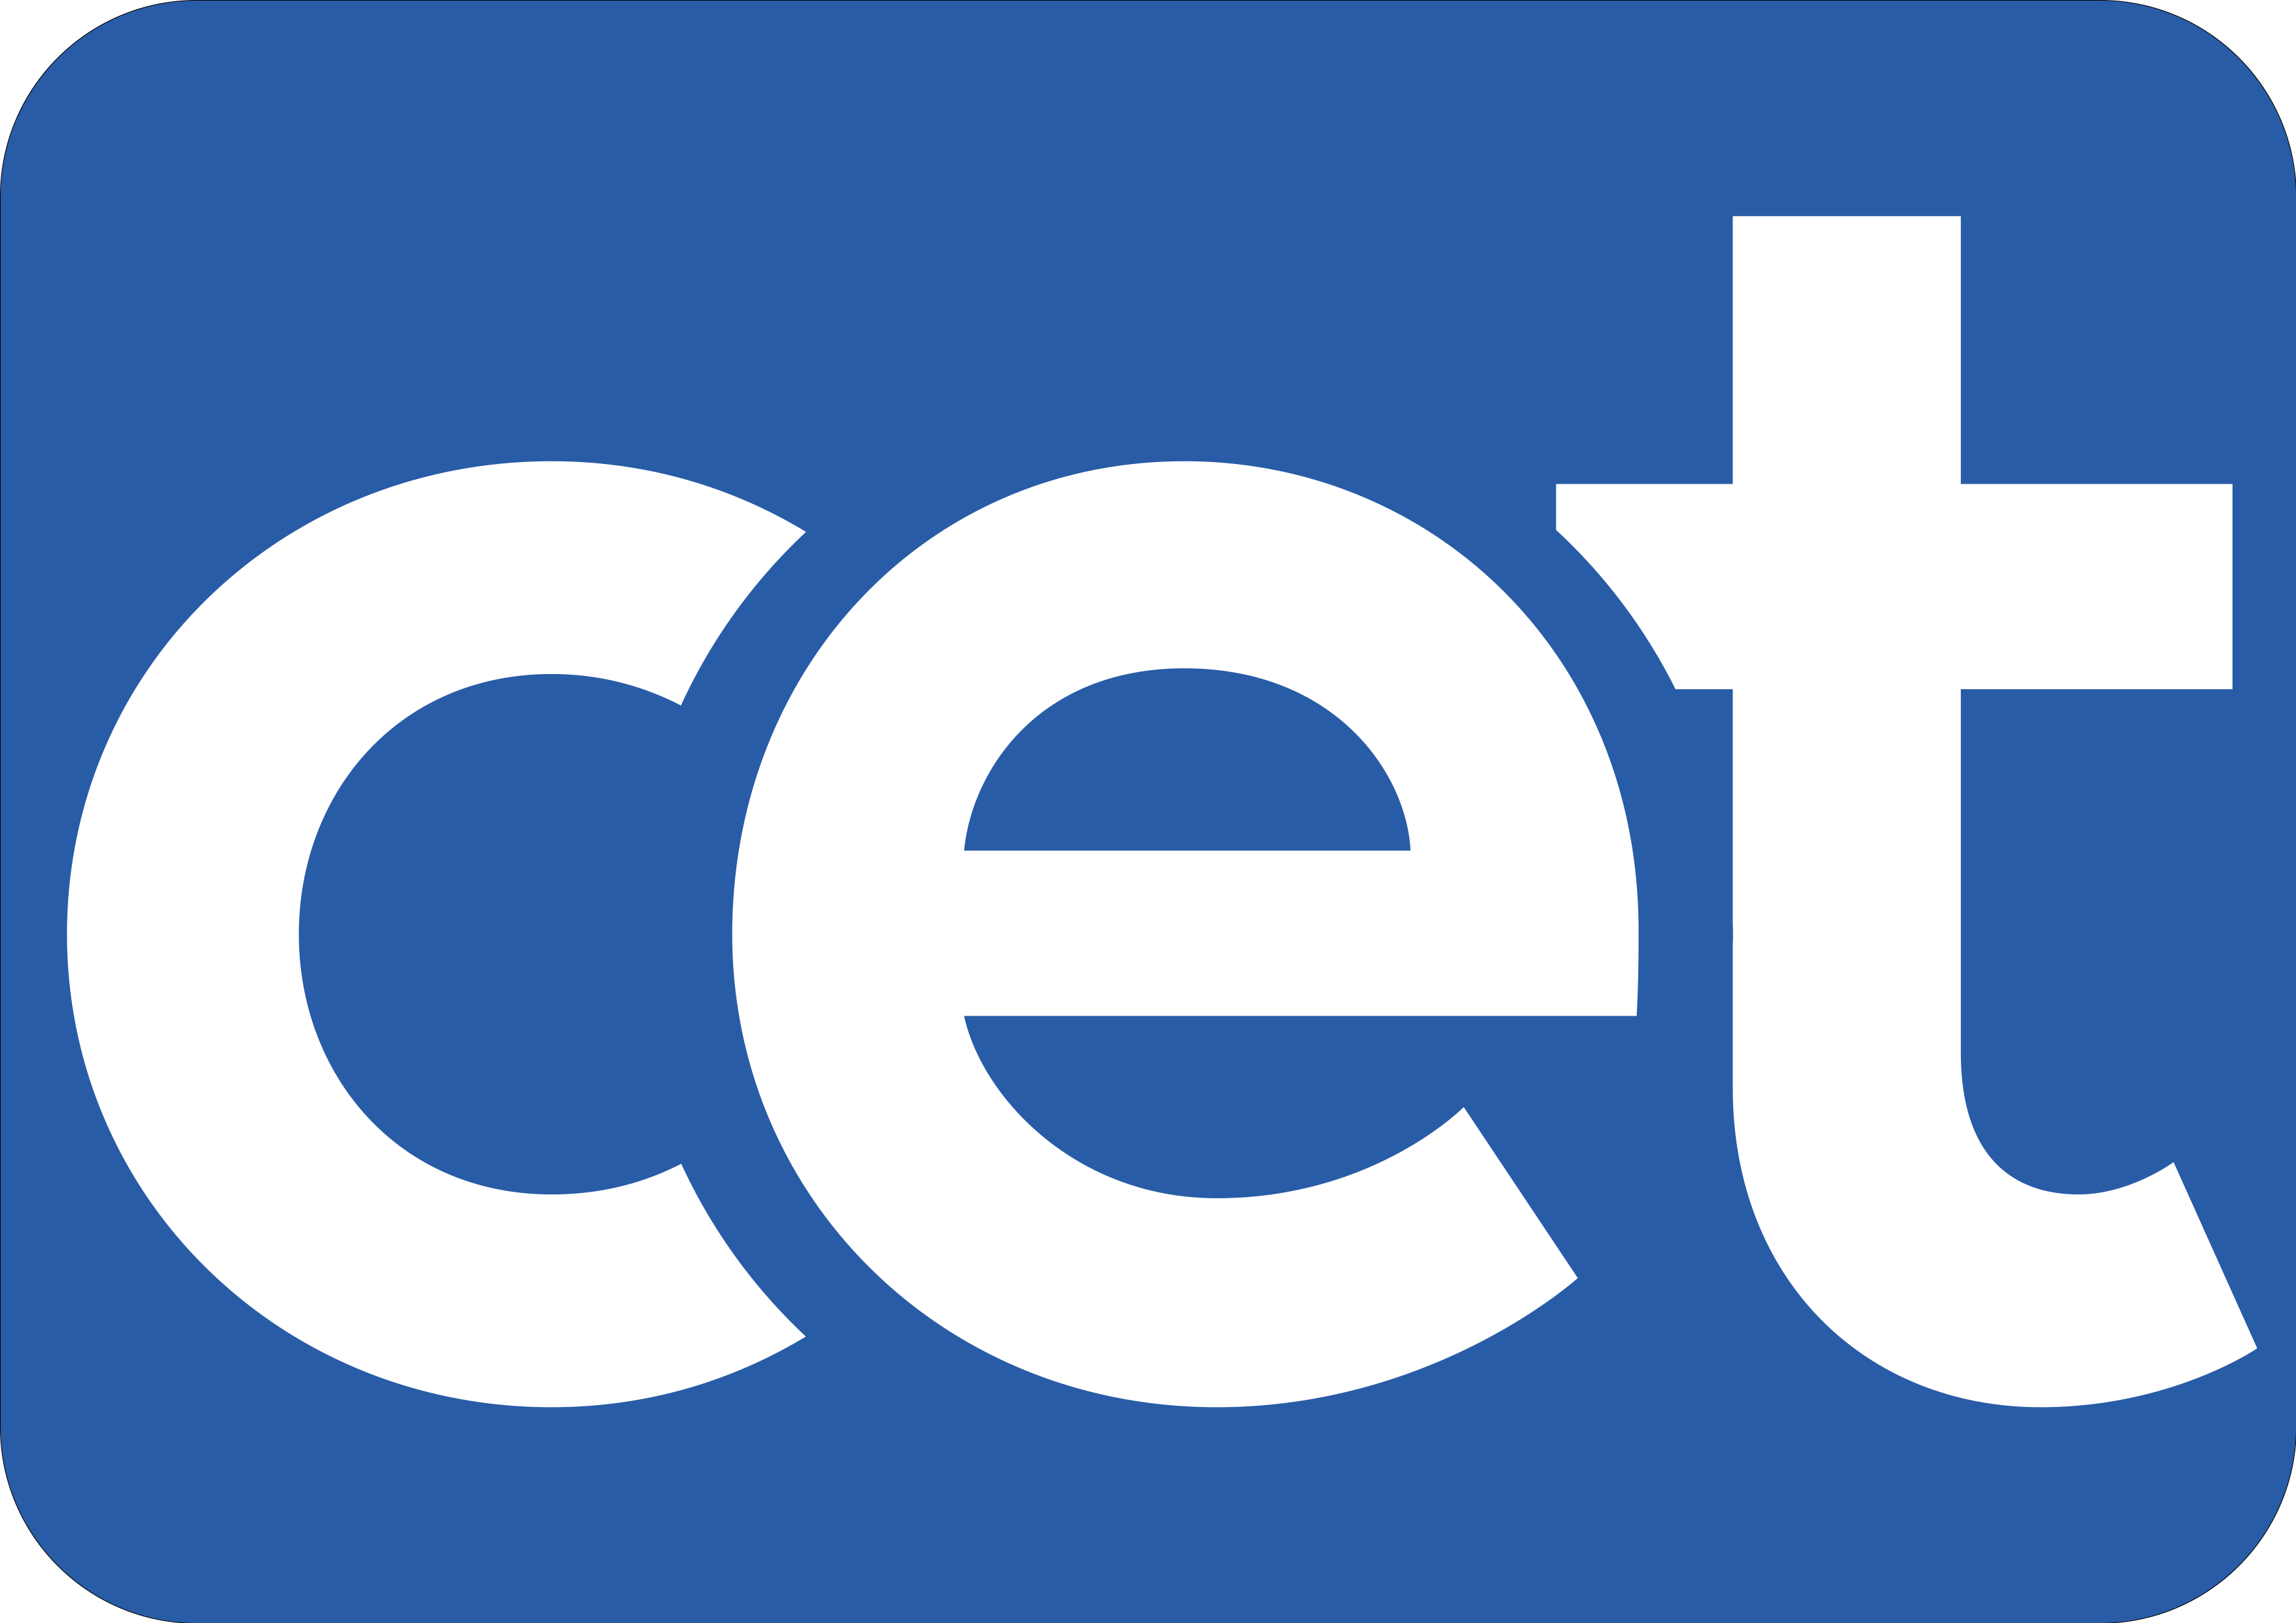 CET rounded logo 2022